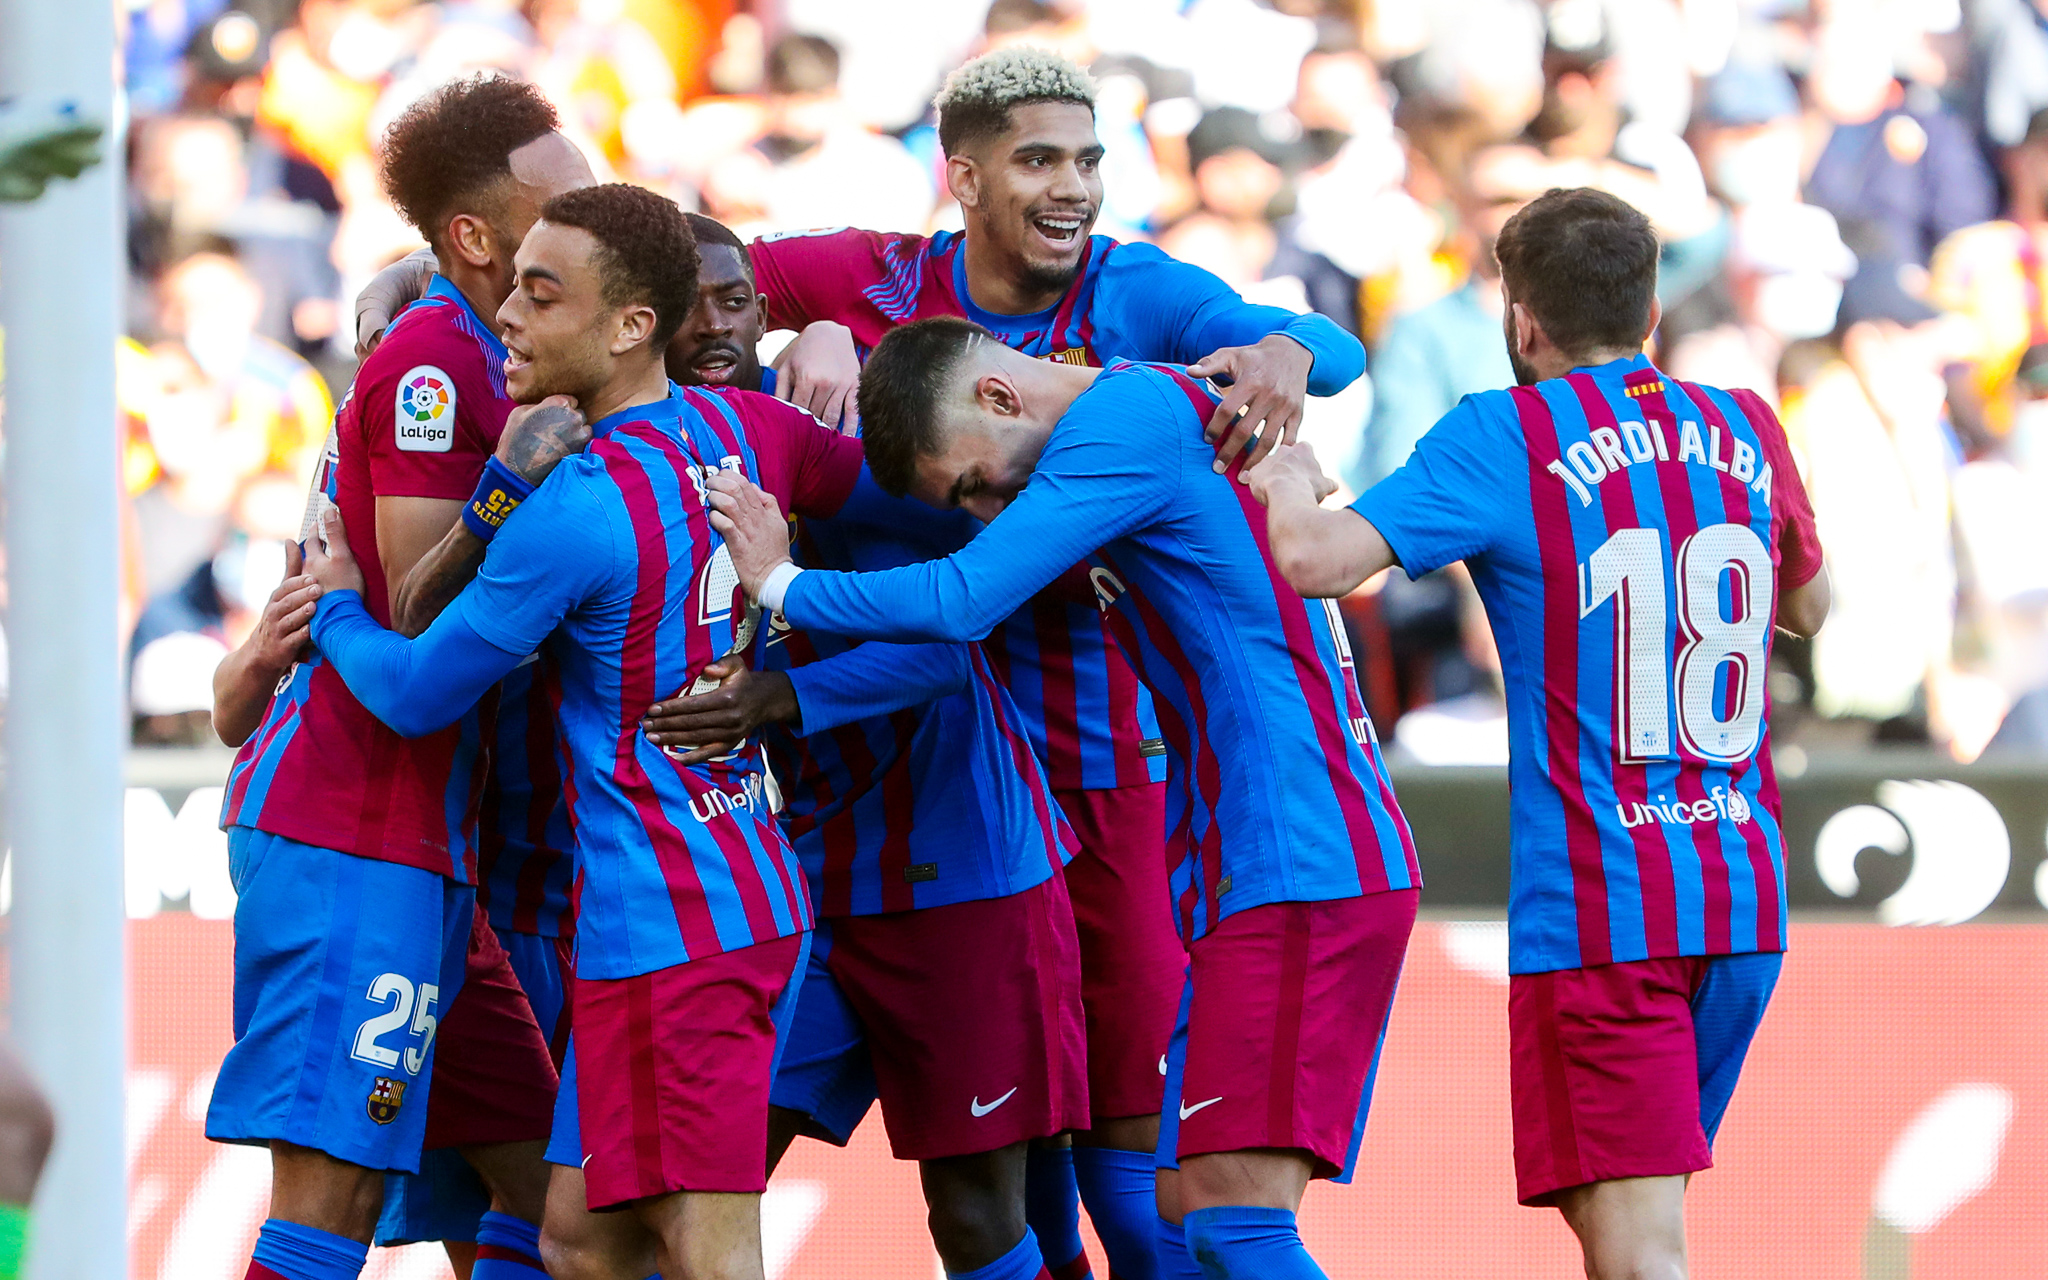 Barcelona beat Valencia: Pierre-Emerick Aubameyang gets off the mark after scoring his first hattrick for Barcelona as they beat Valencia in stunning fashion 